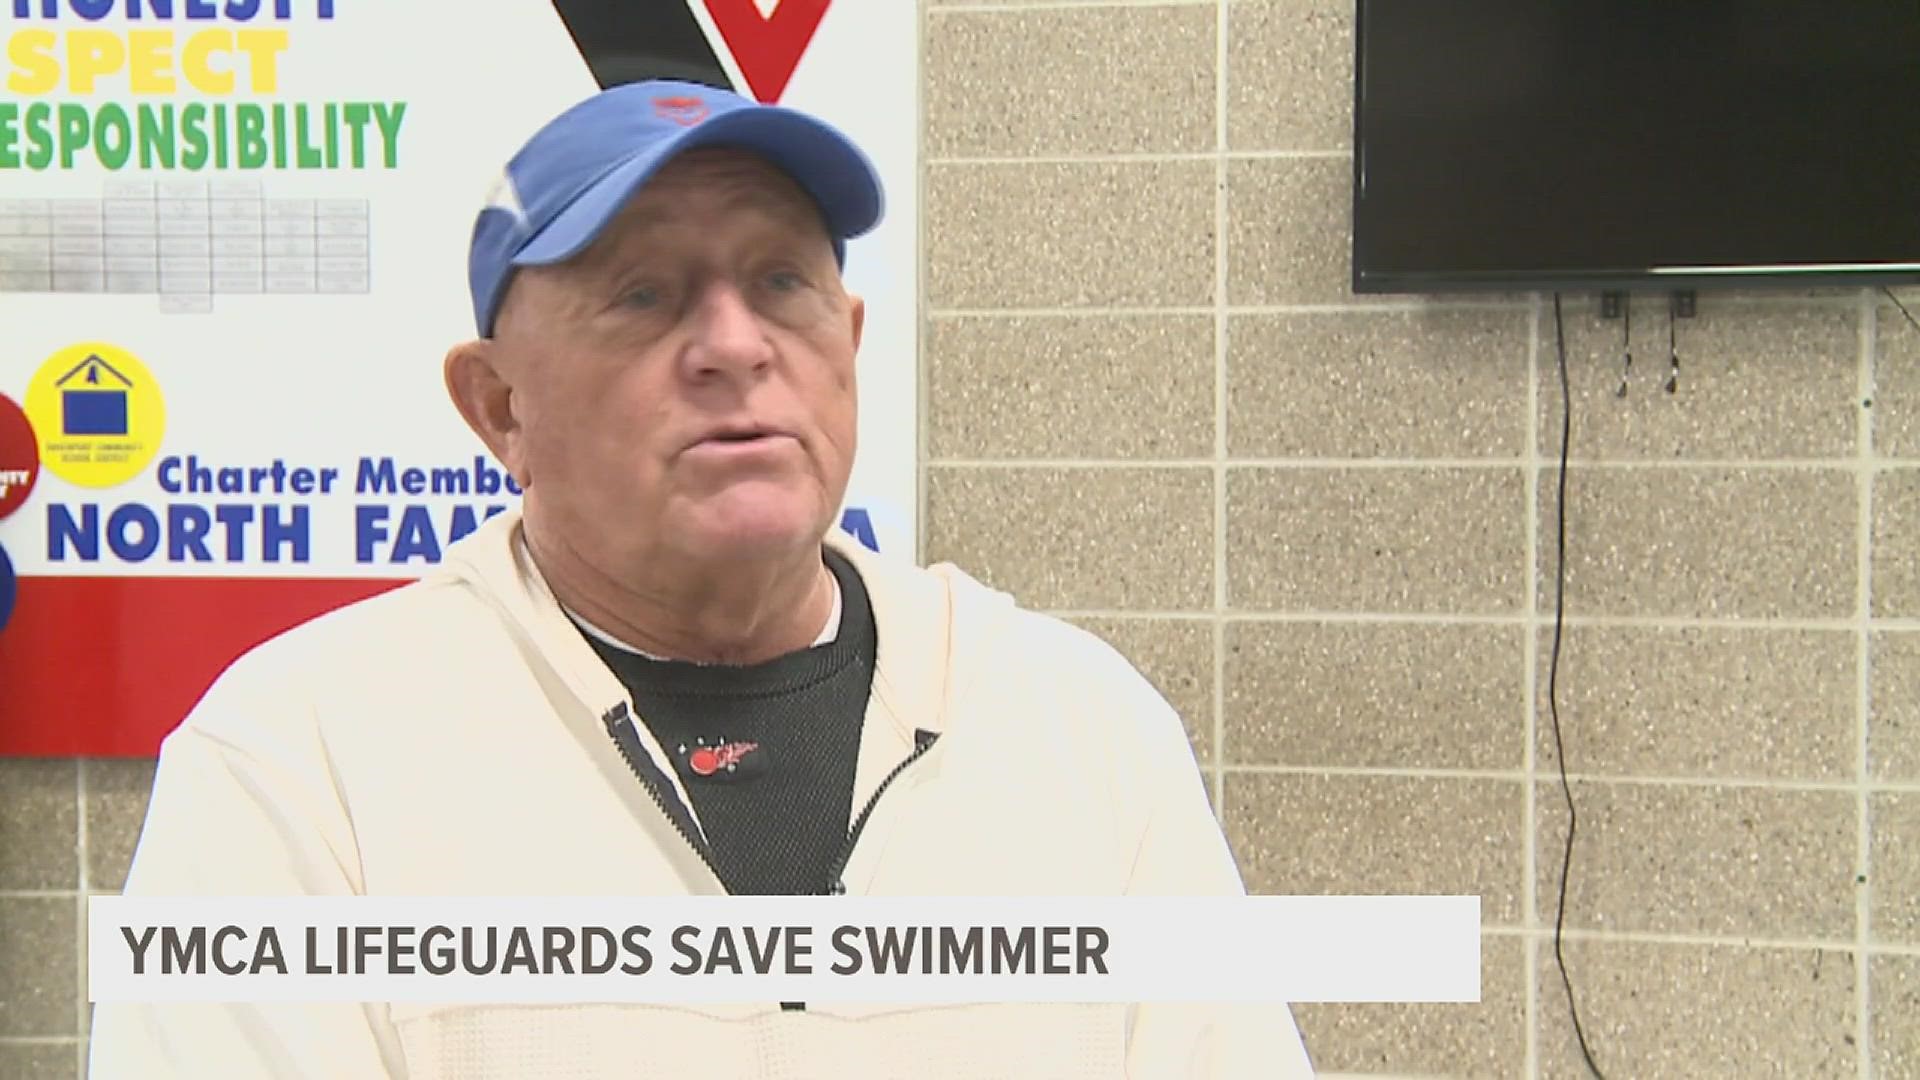 Craig Kinser was getting recertified as a lifeguard when his heart stopped beating. Now, his heroes are being honored.